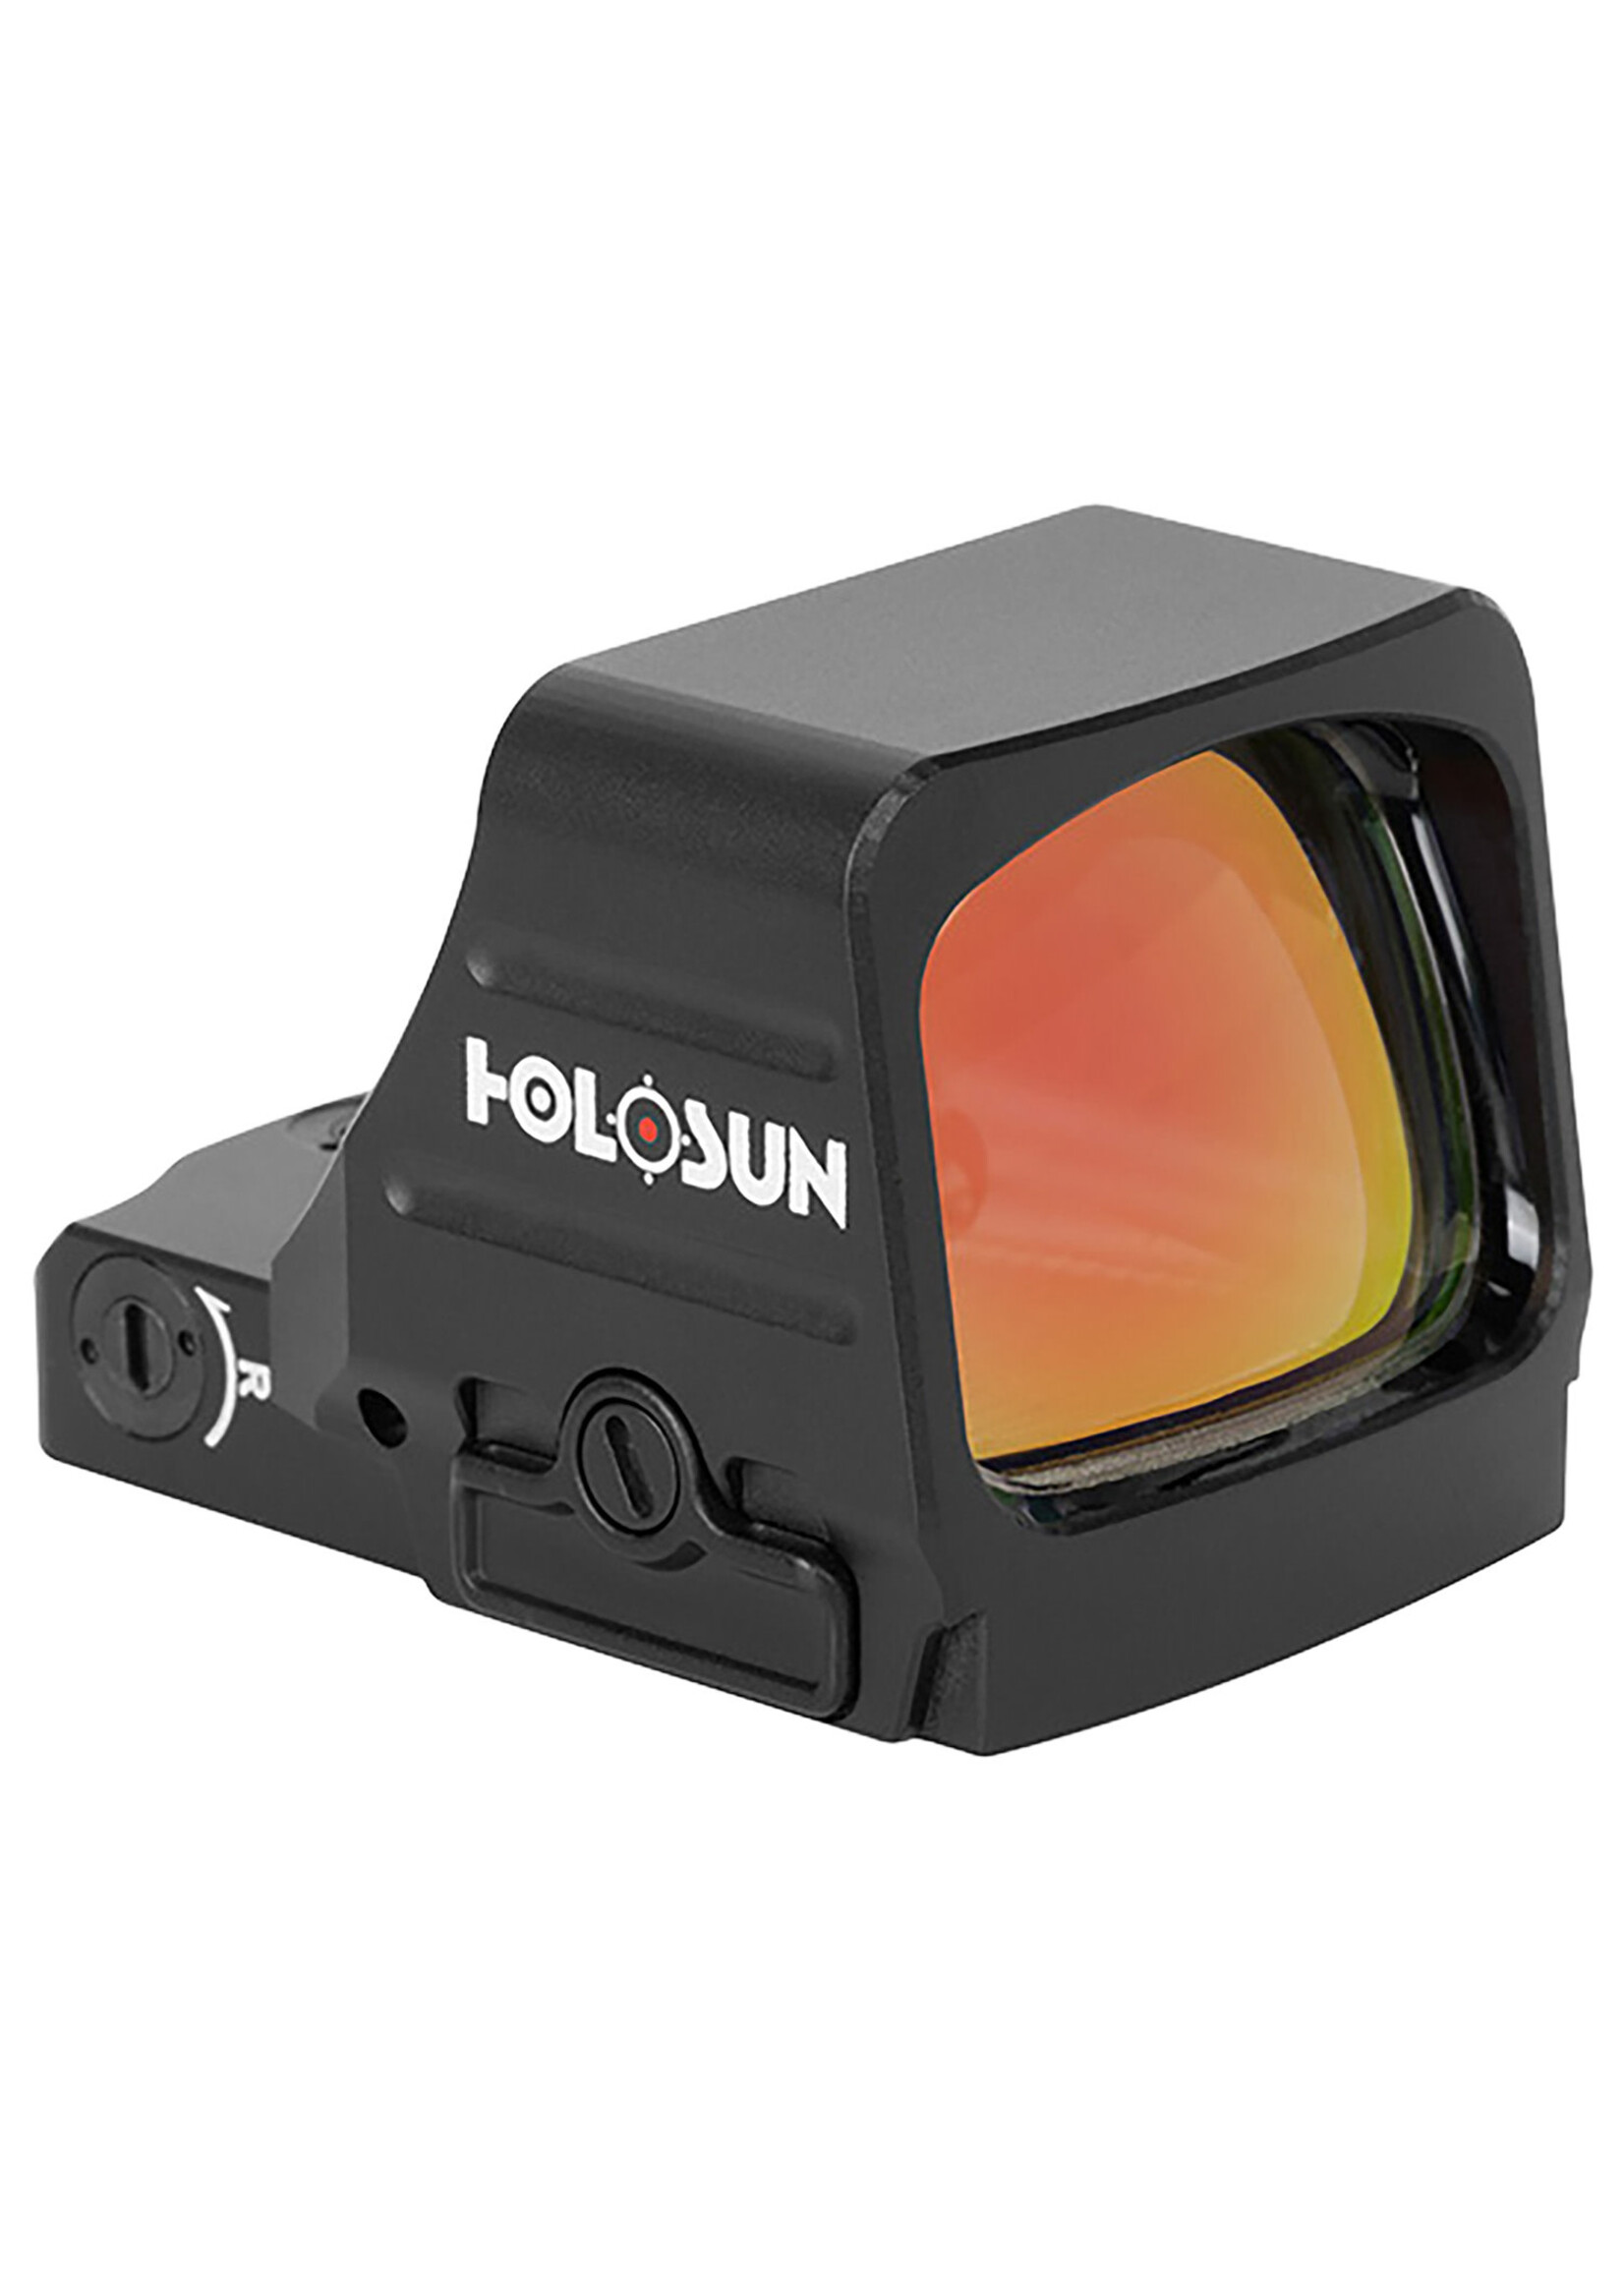 Holosun Holosun HS507COMP HS507COMP Black Anodized 1.1 x 0.87 CRS Red Multi Reticle